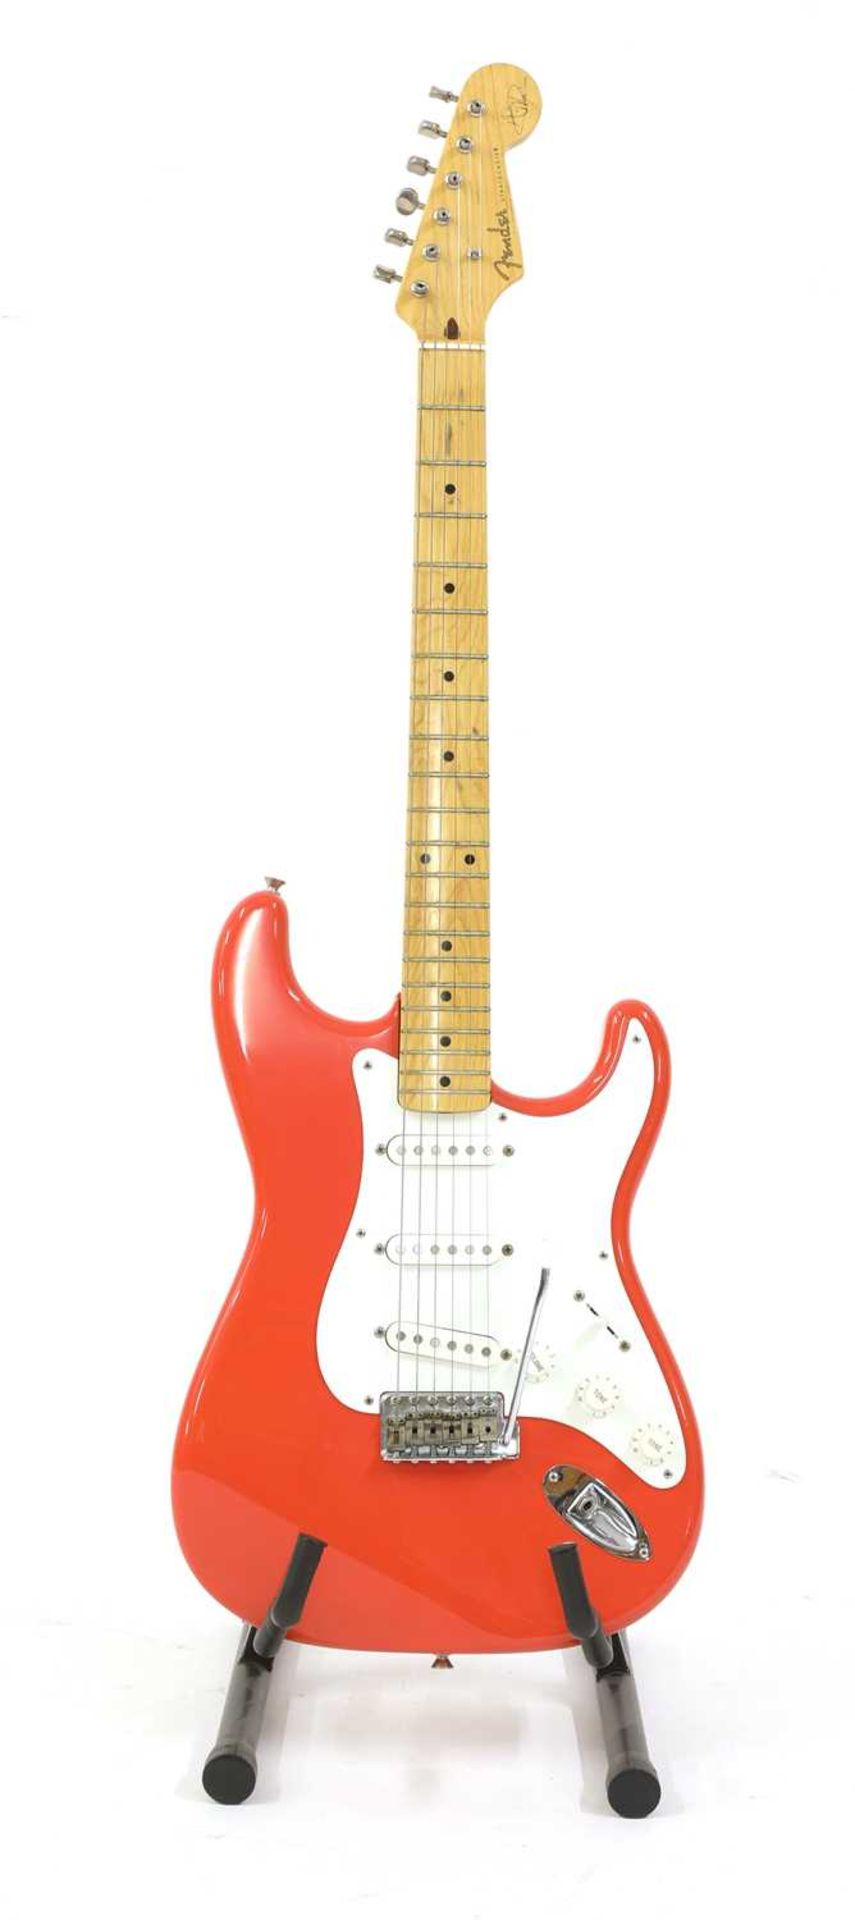 A 1996 Fender Stratocaster Hank Marvin Signature electric guitar,